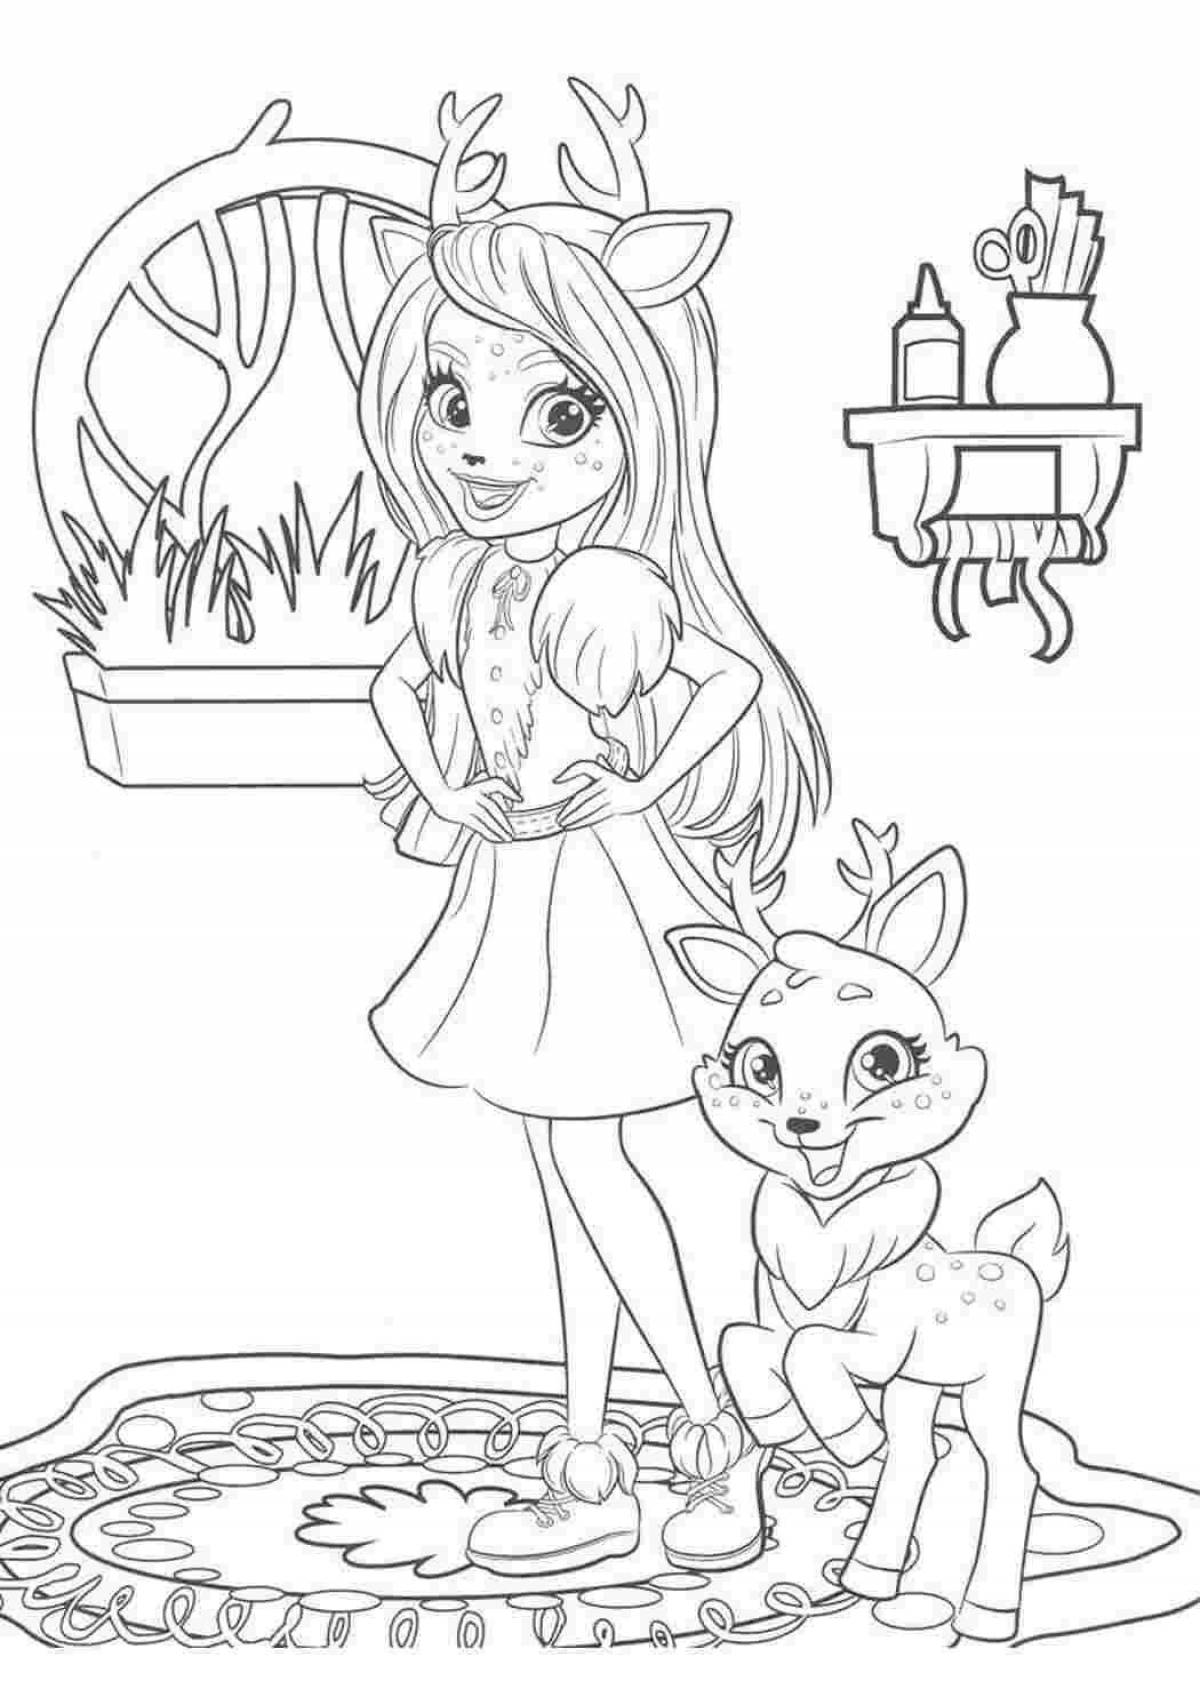 Animated felicity coloring page